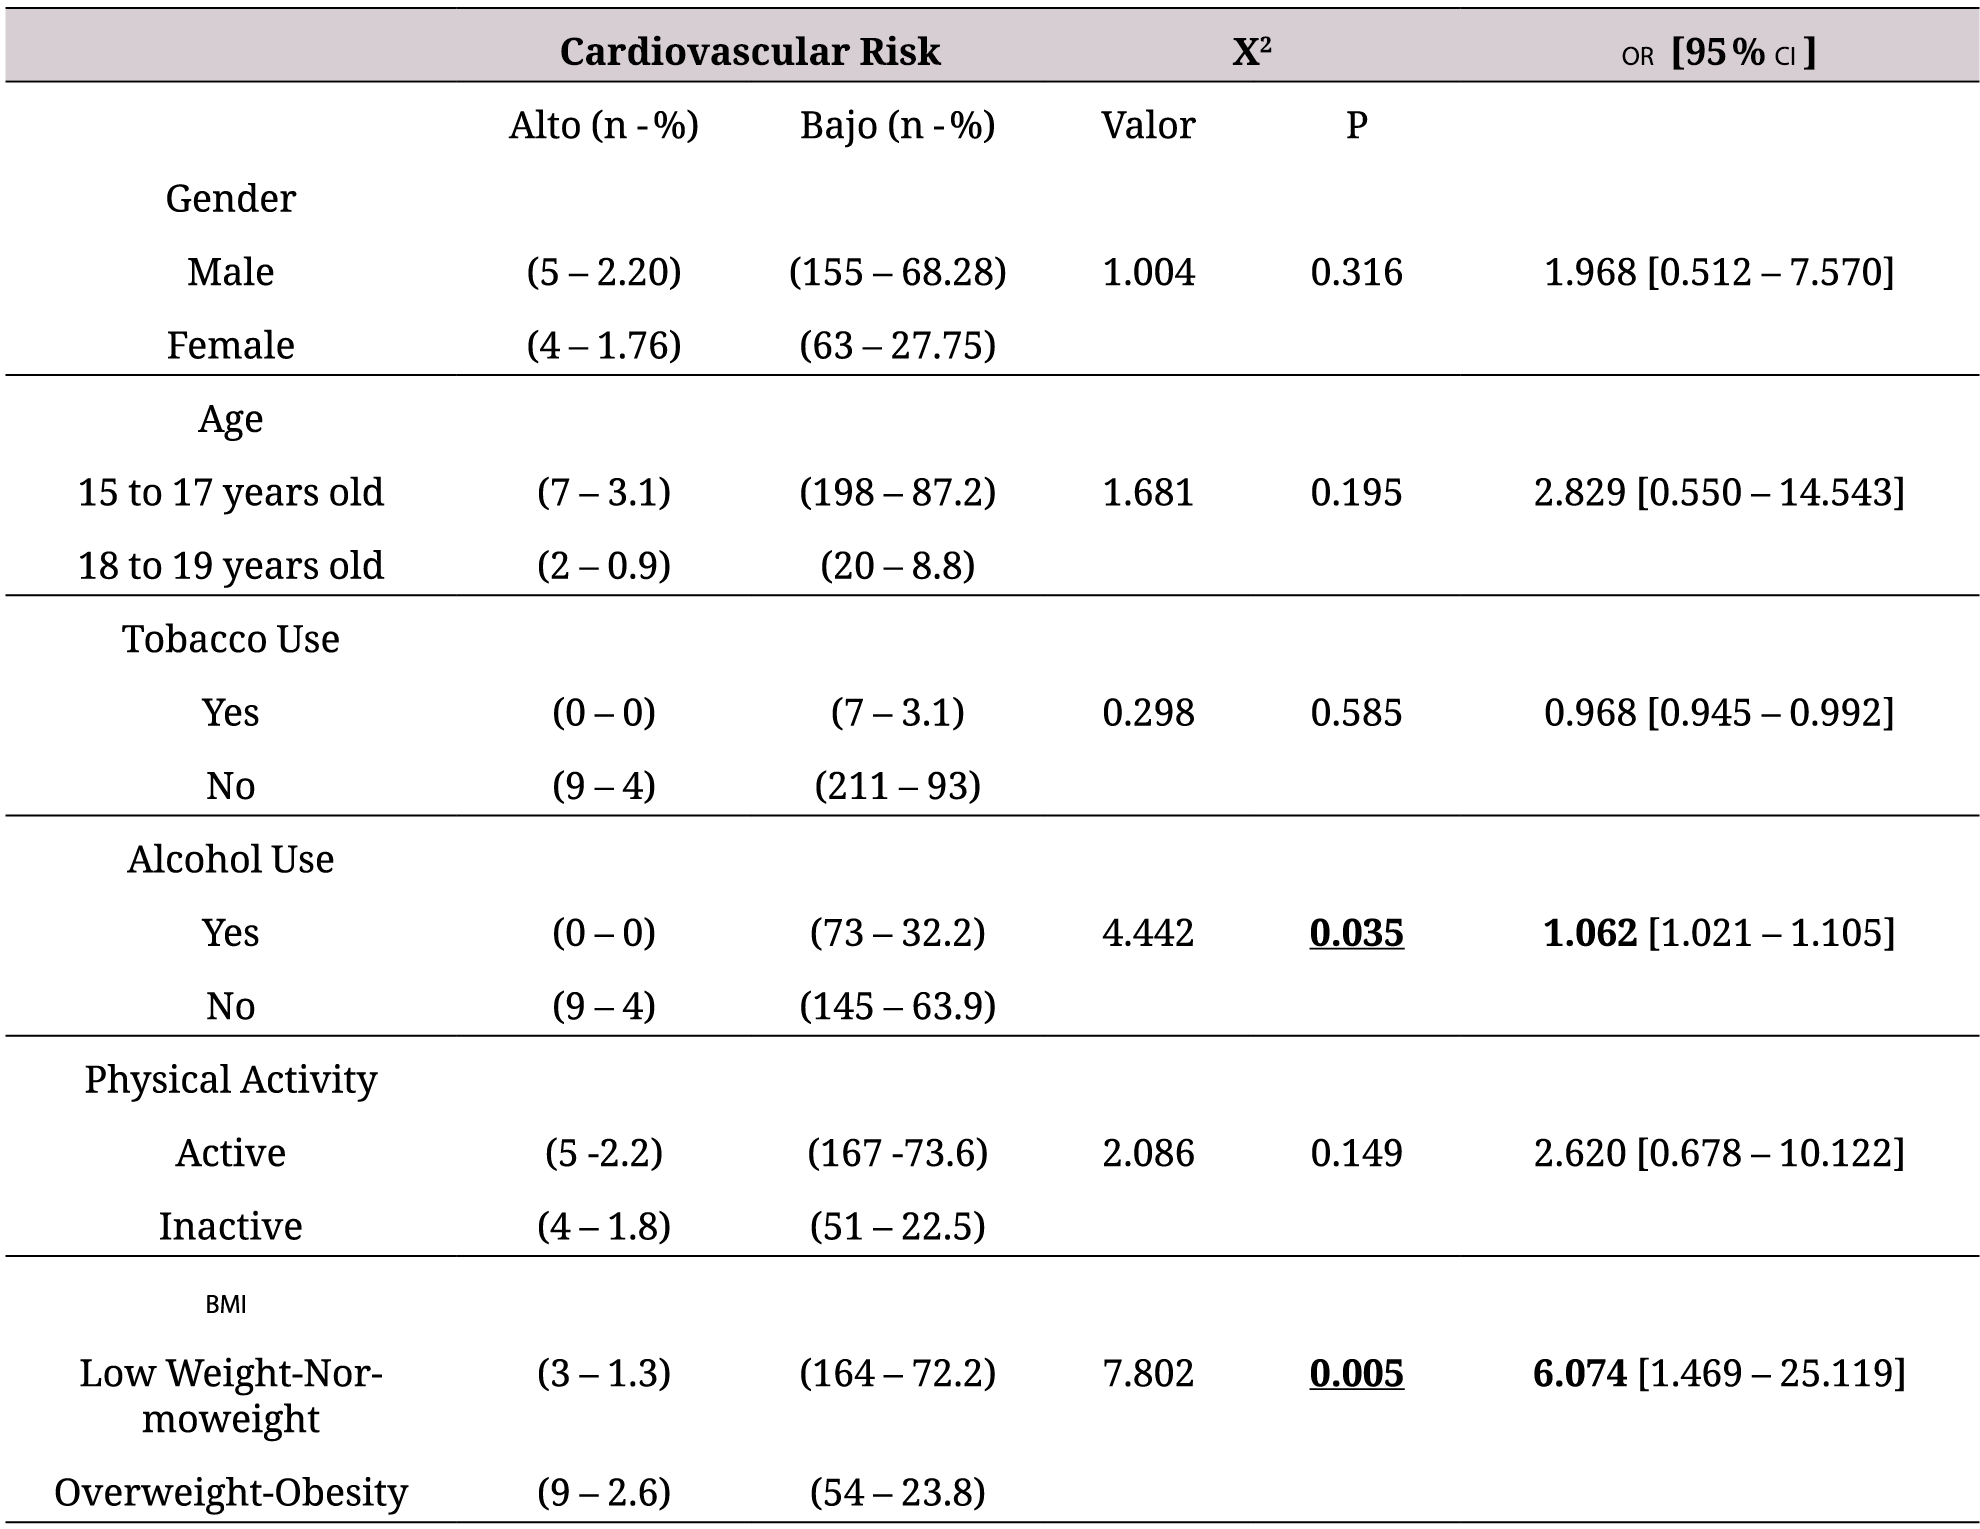 Association of the sociodemographic variables, anthropometric measures with cardiovascular risk